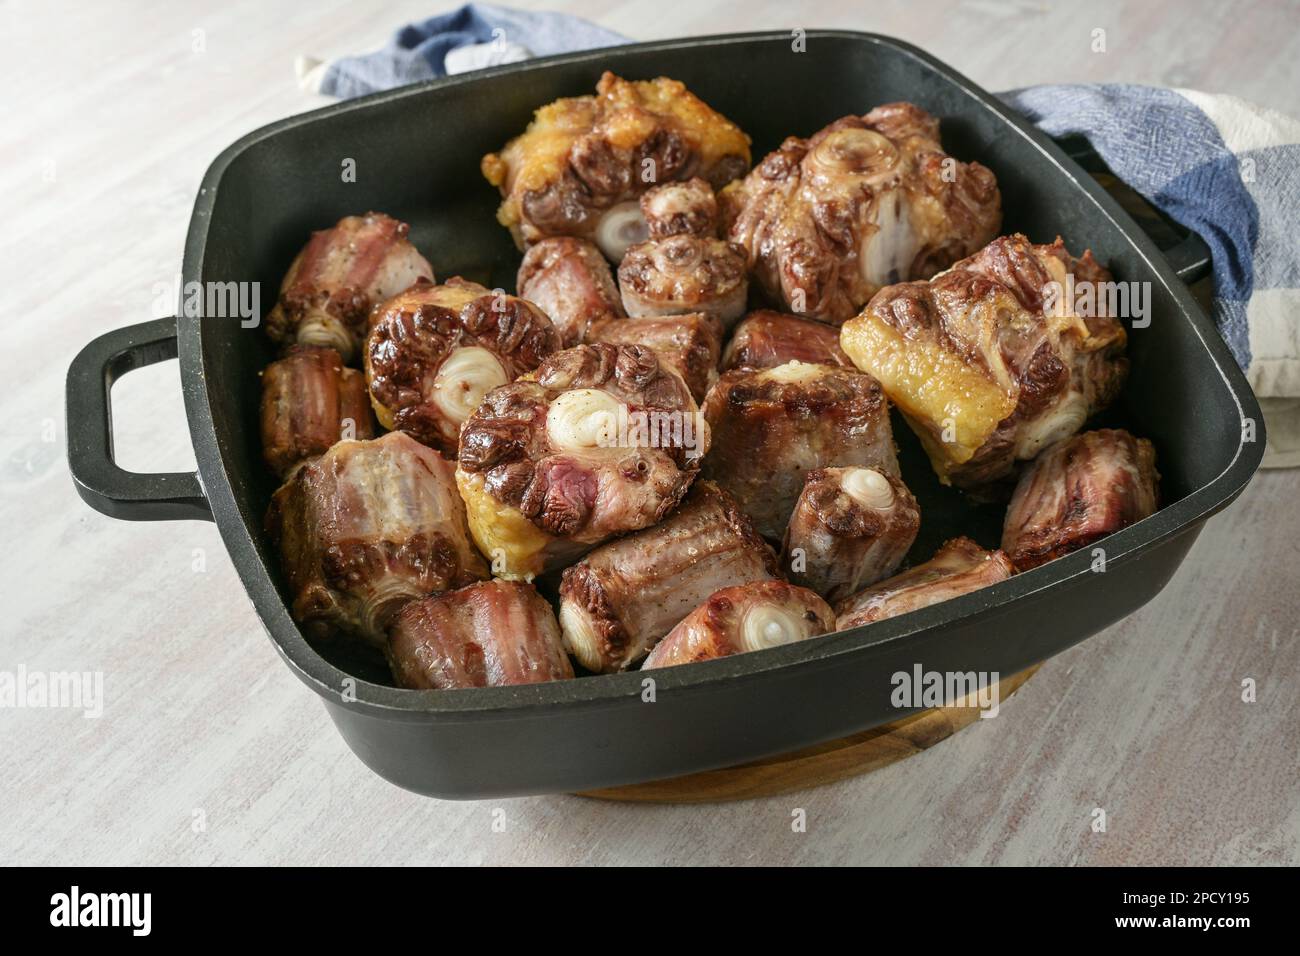 Roasted oxtail pieces with bone in a black tray fresh from the oven, gelatin-rich meat for a slow-cooking stew or traditional oxtail soup, copy space, Stock Photo